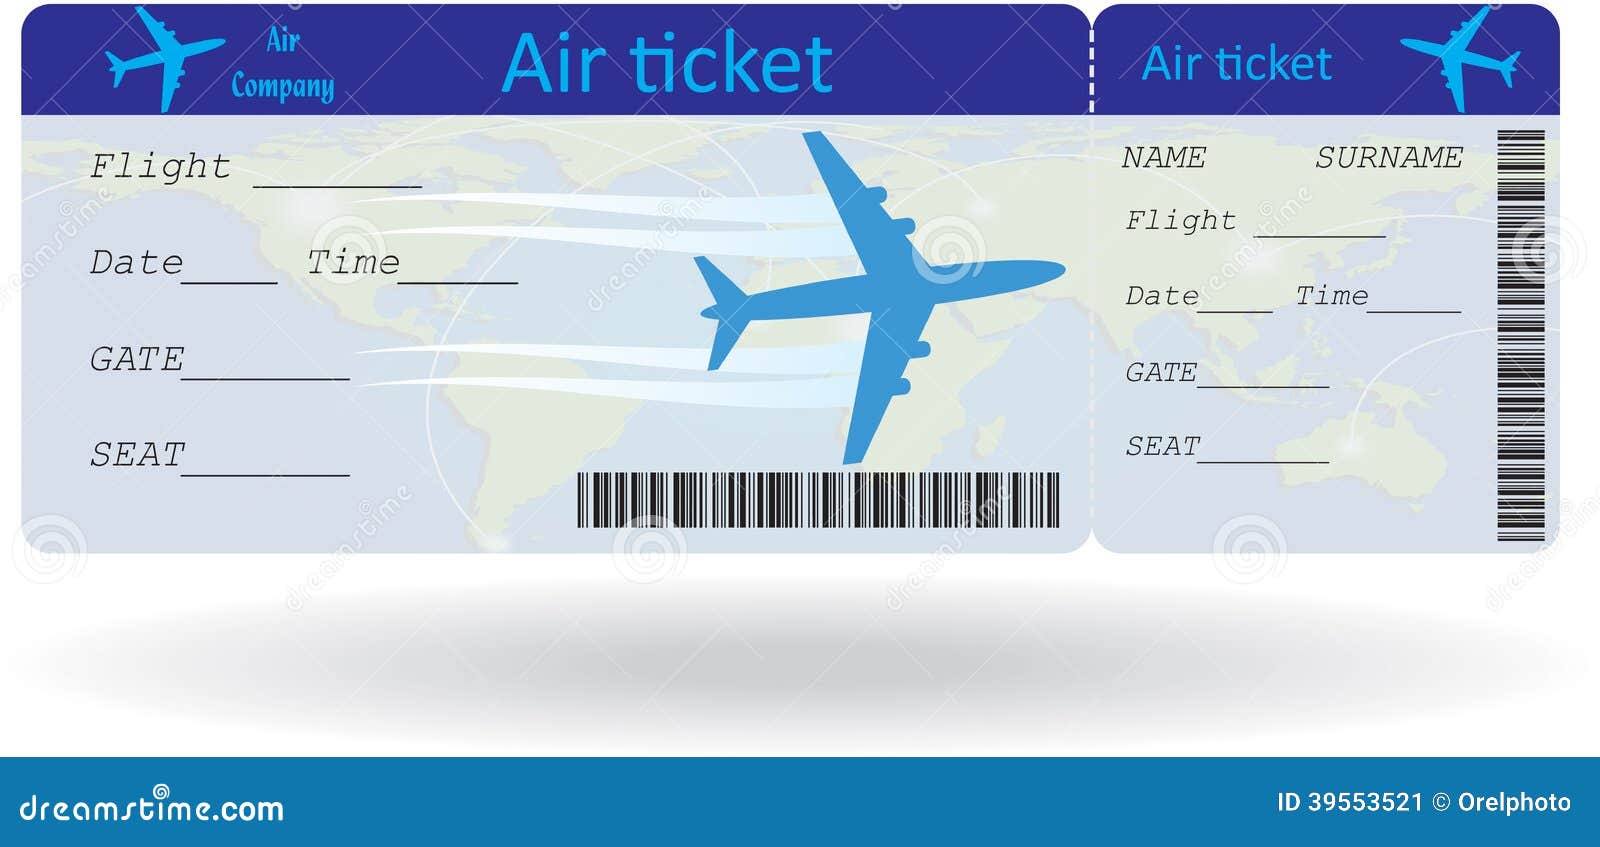 Variant Of Air Ticket Stock Vector - Image: 39553521